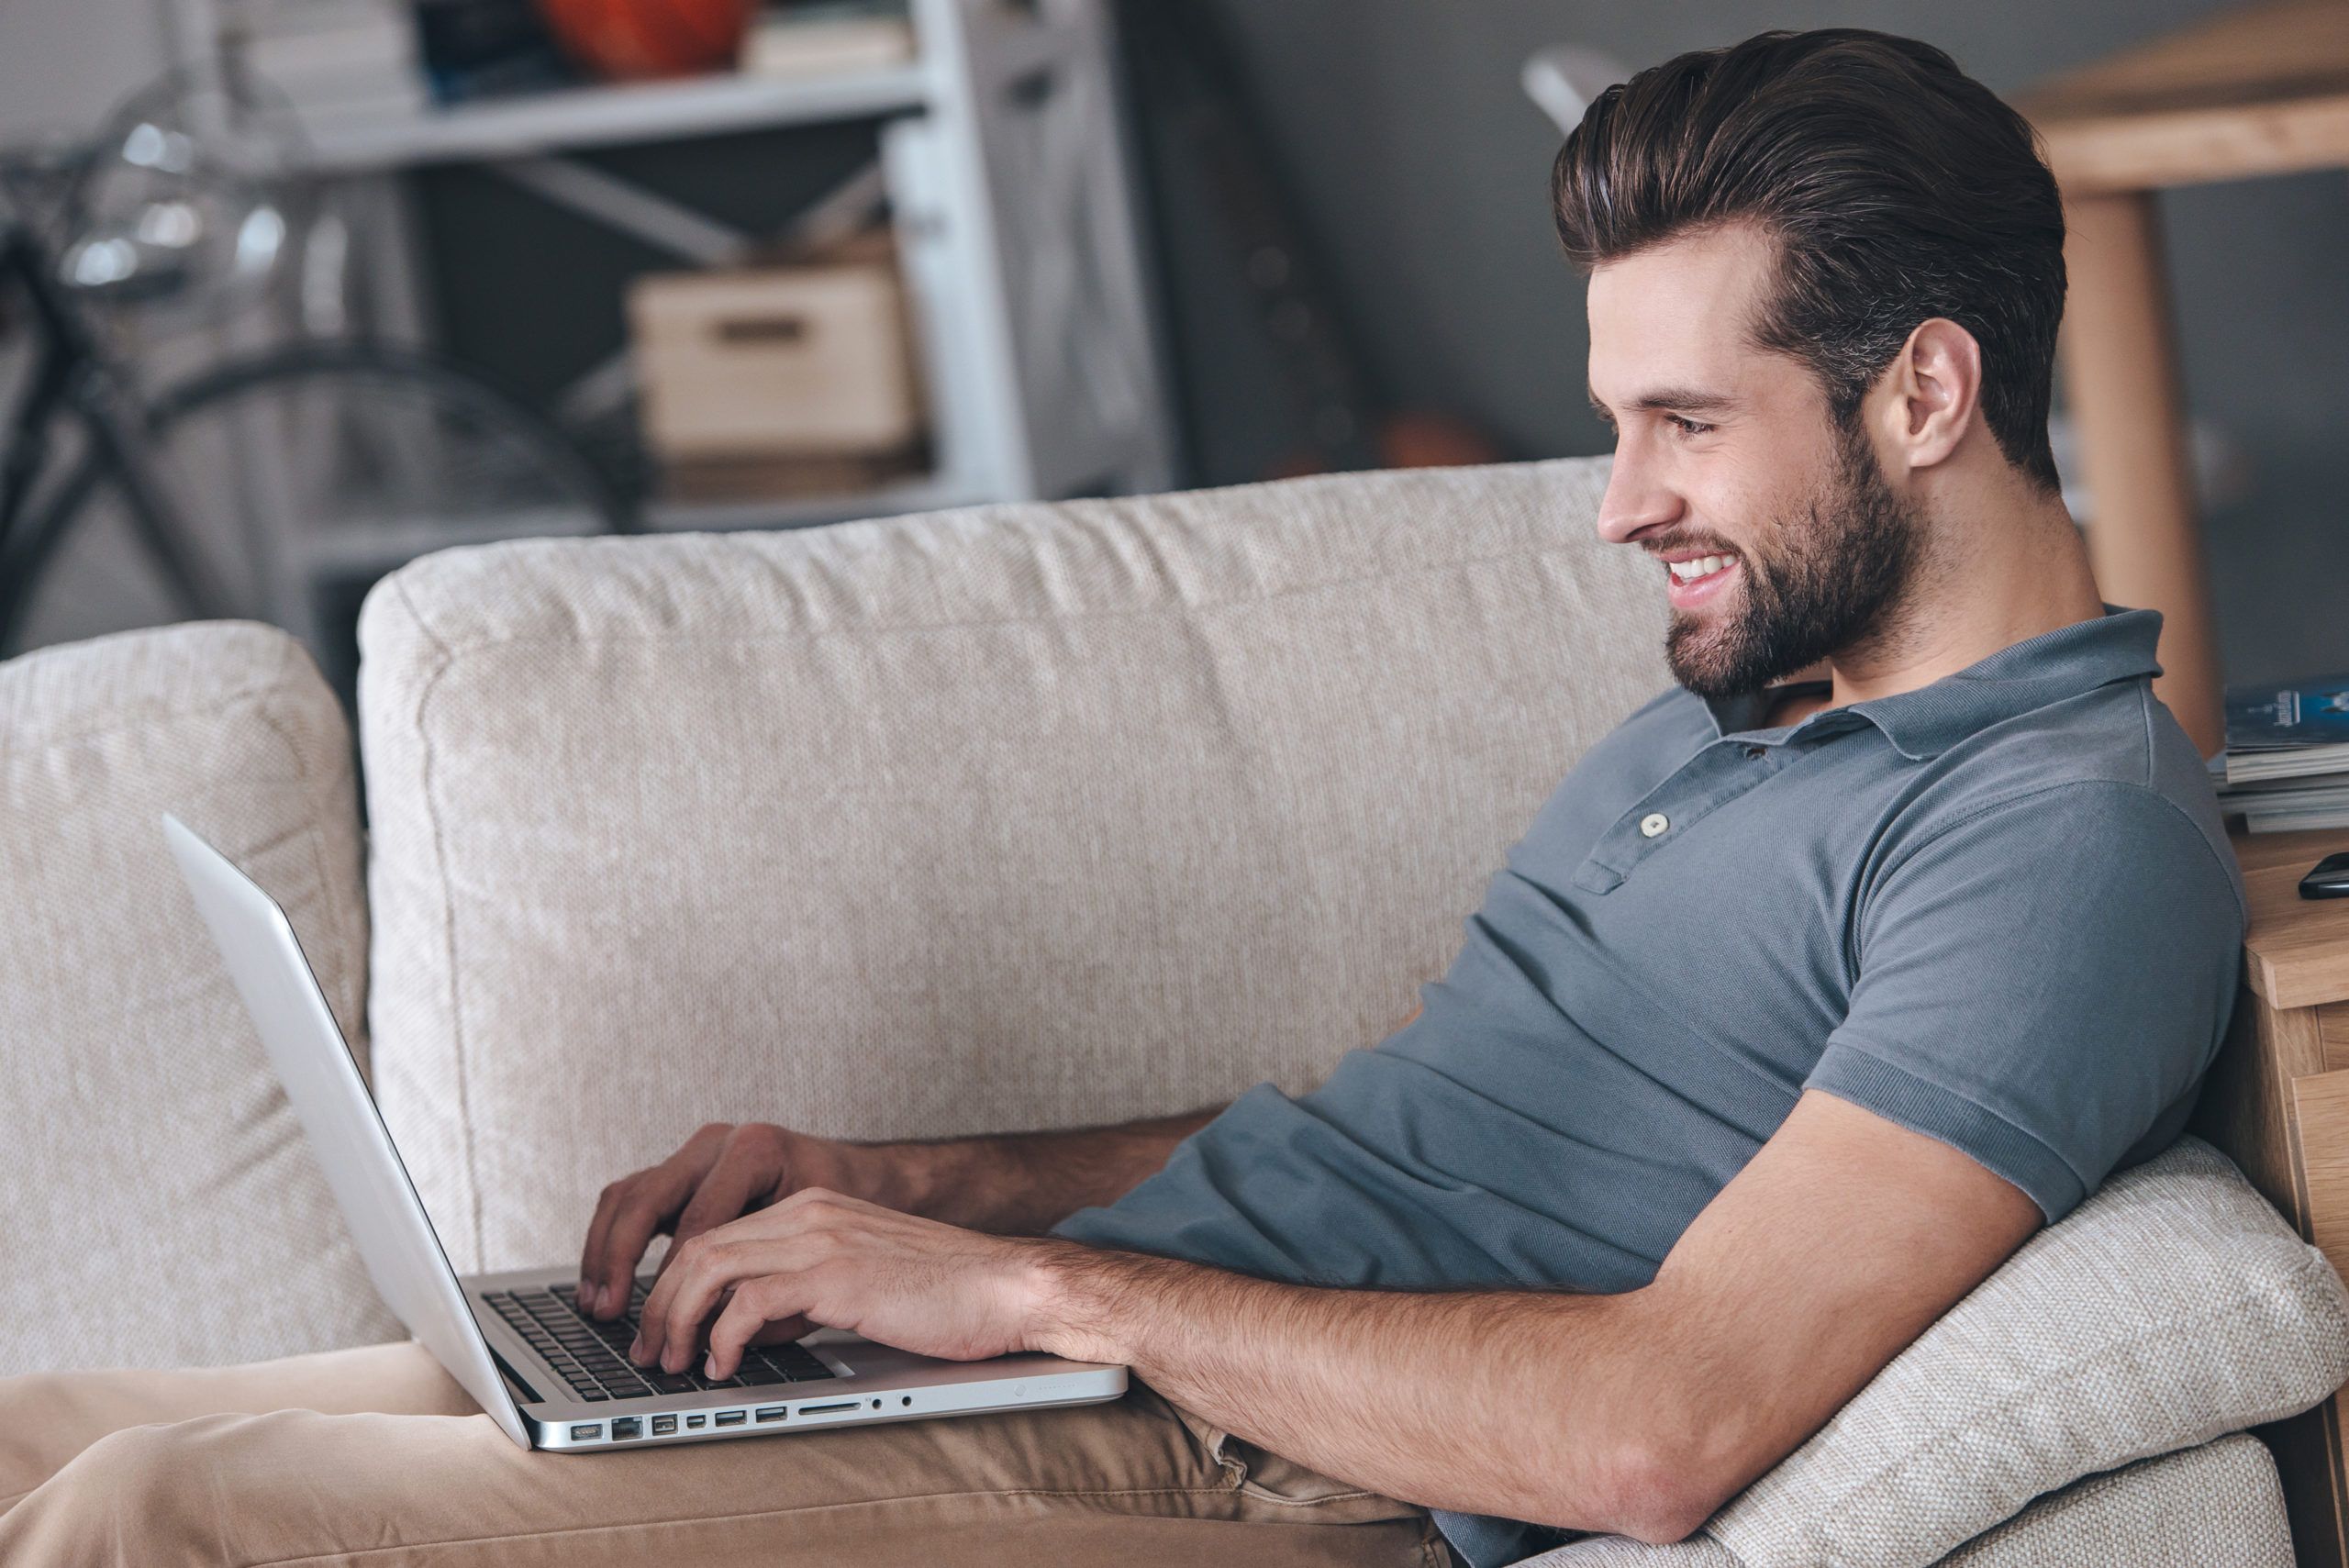 Typing new blog post. Side view of handsome young man using his laptop with smile while sitting on the couch at home